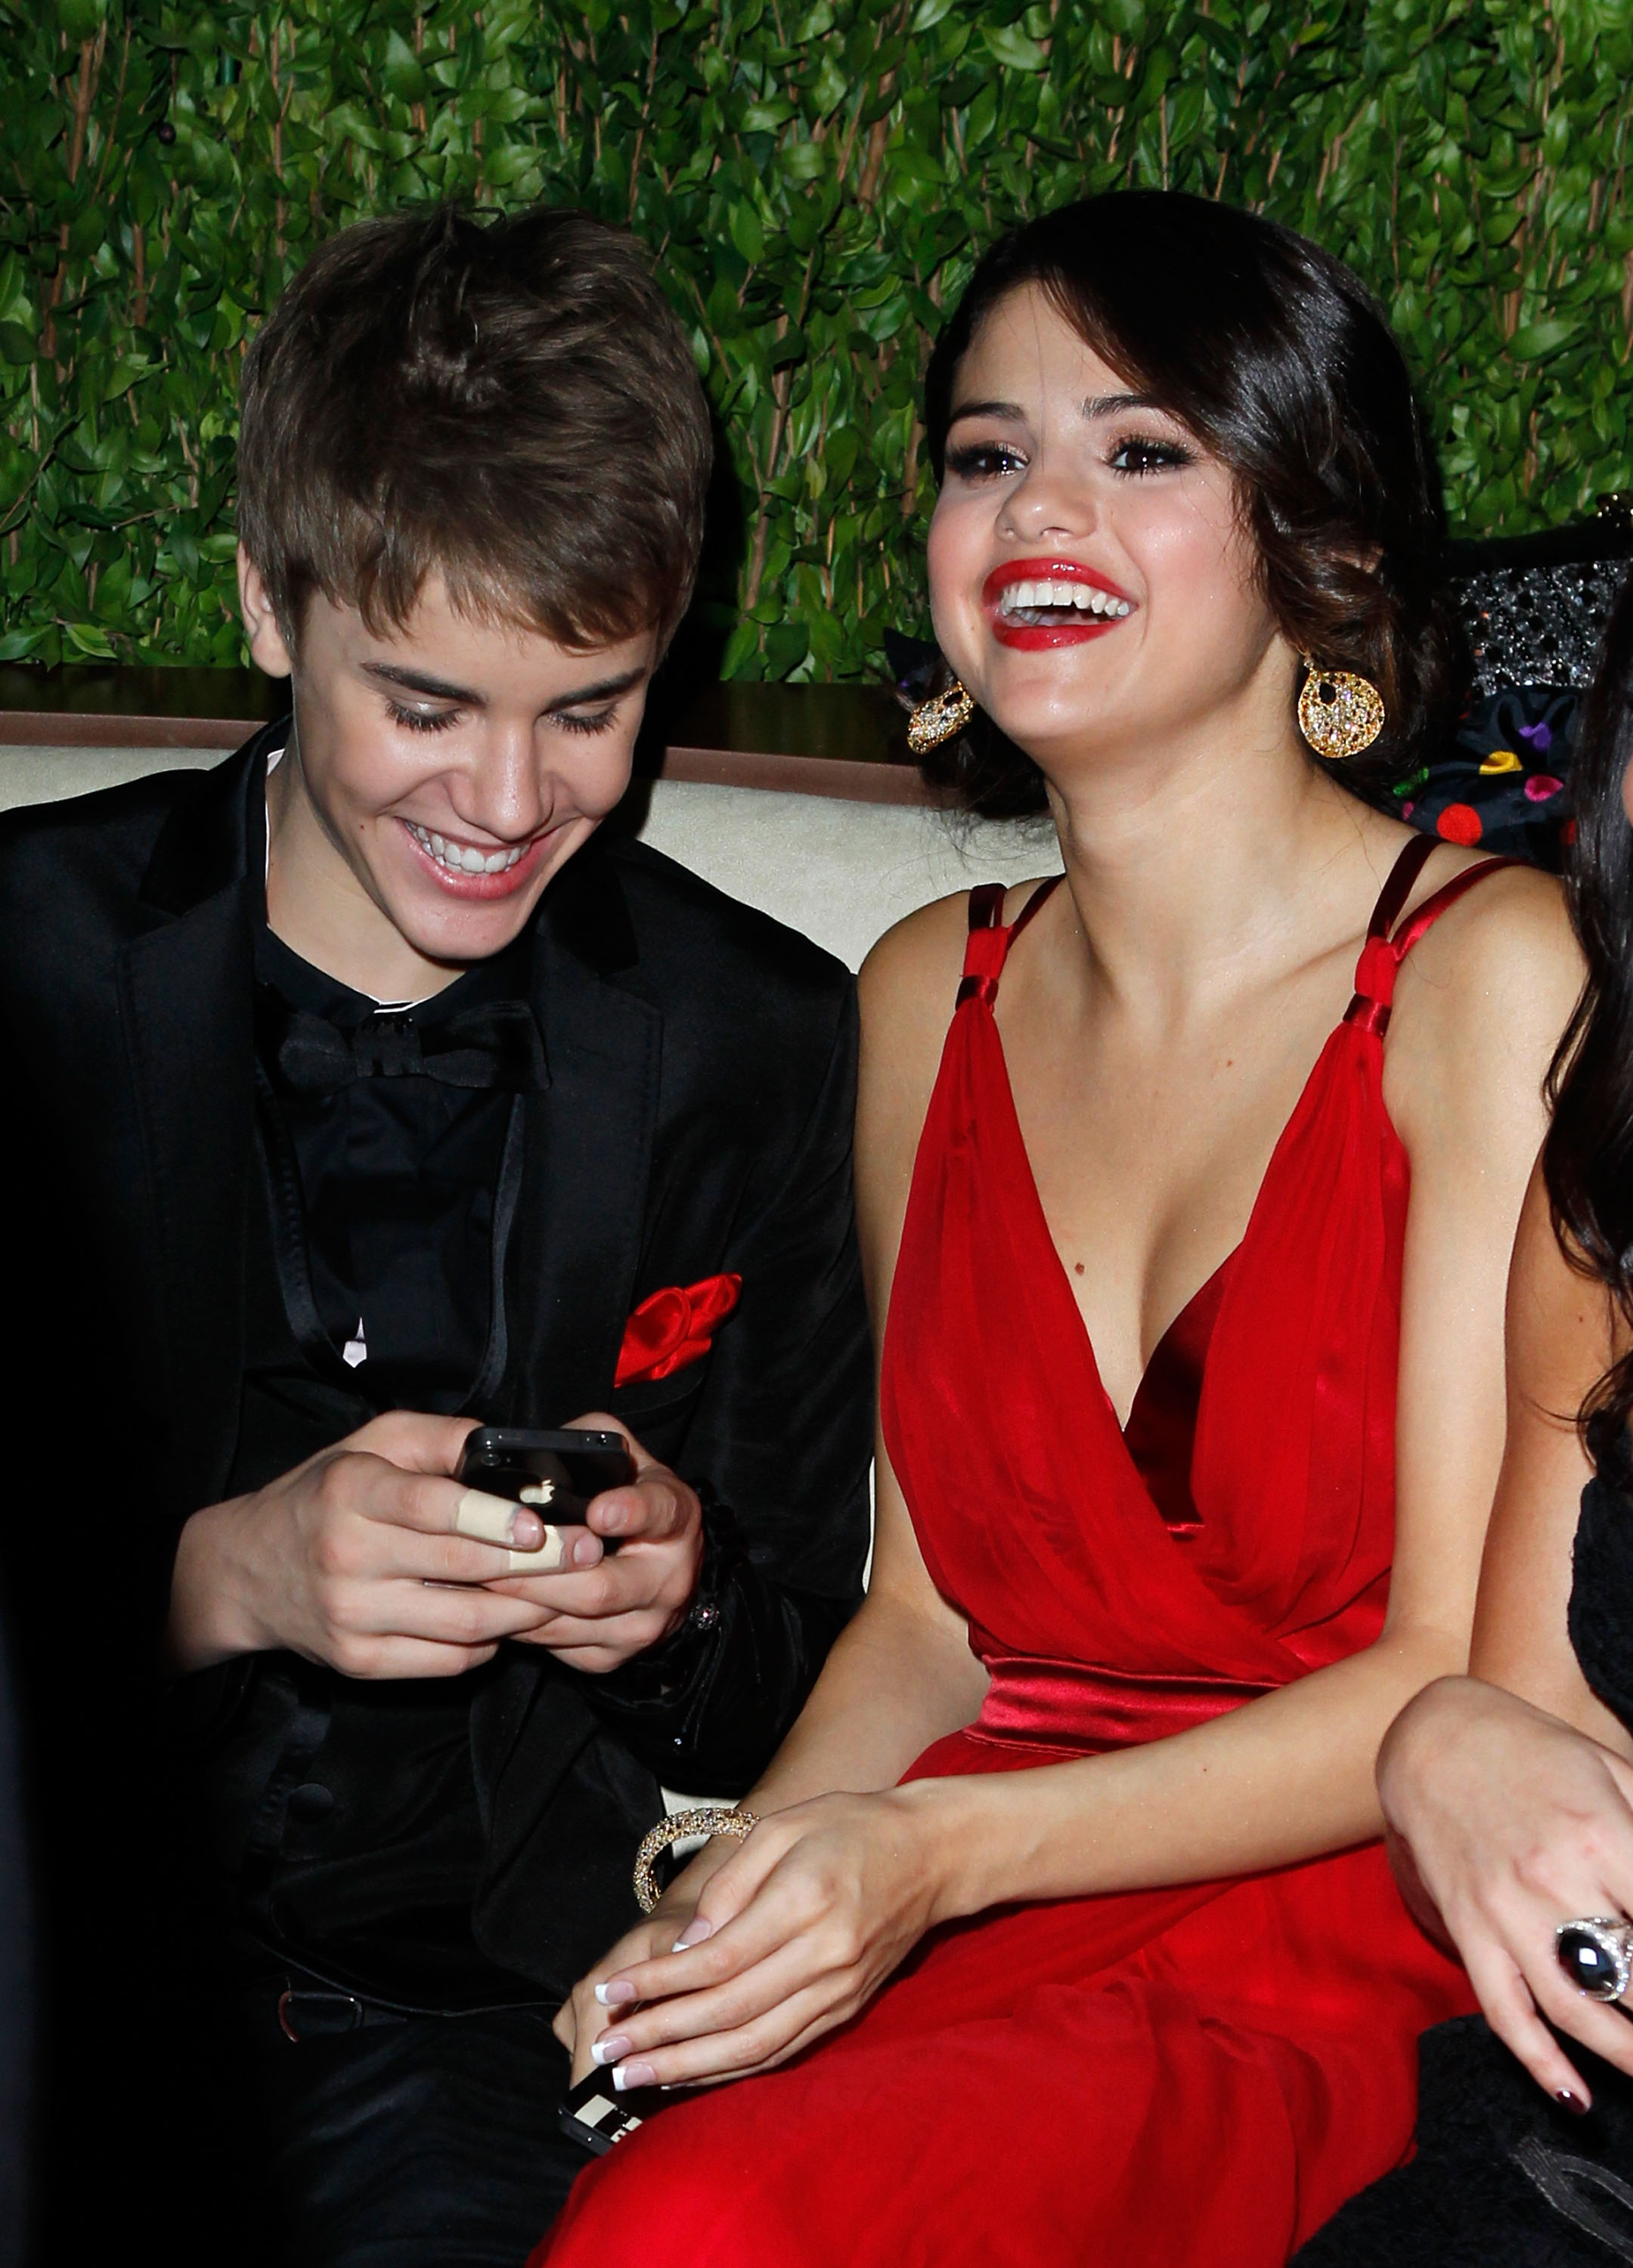 selena gomez and justin bieber touching each other